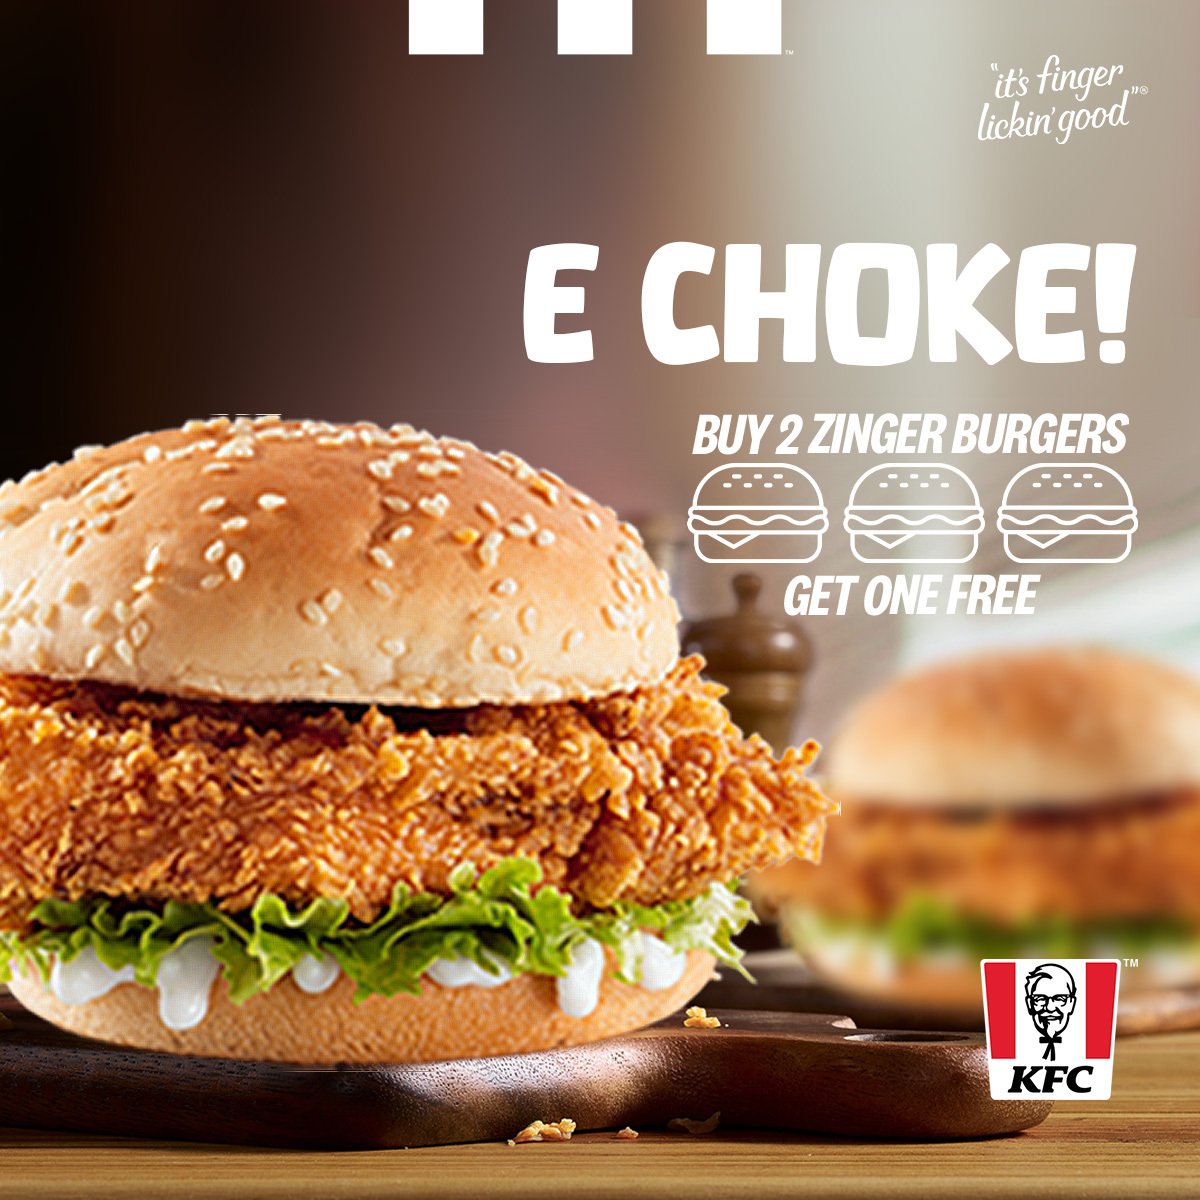 Hey KFC Lovers,  It's just hours to the end of the #KFCBurgerFest Week, and these juicy, crispy, Zinger Burgers deserve to be held by you. Treat yourself (and maybe a friend or two!) before this Finger-Lickin' offer ends. Head over to any KFC restaurant near you or click the